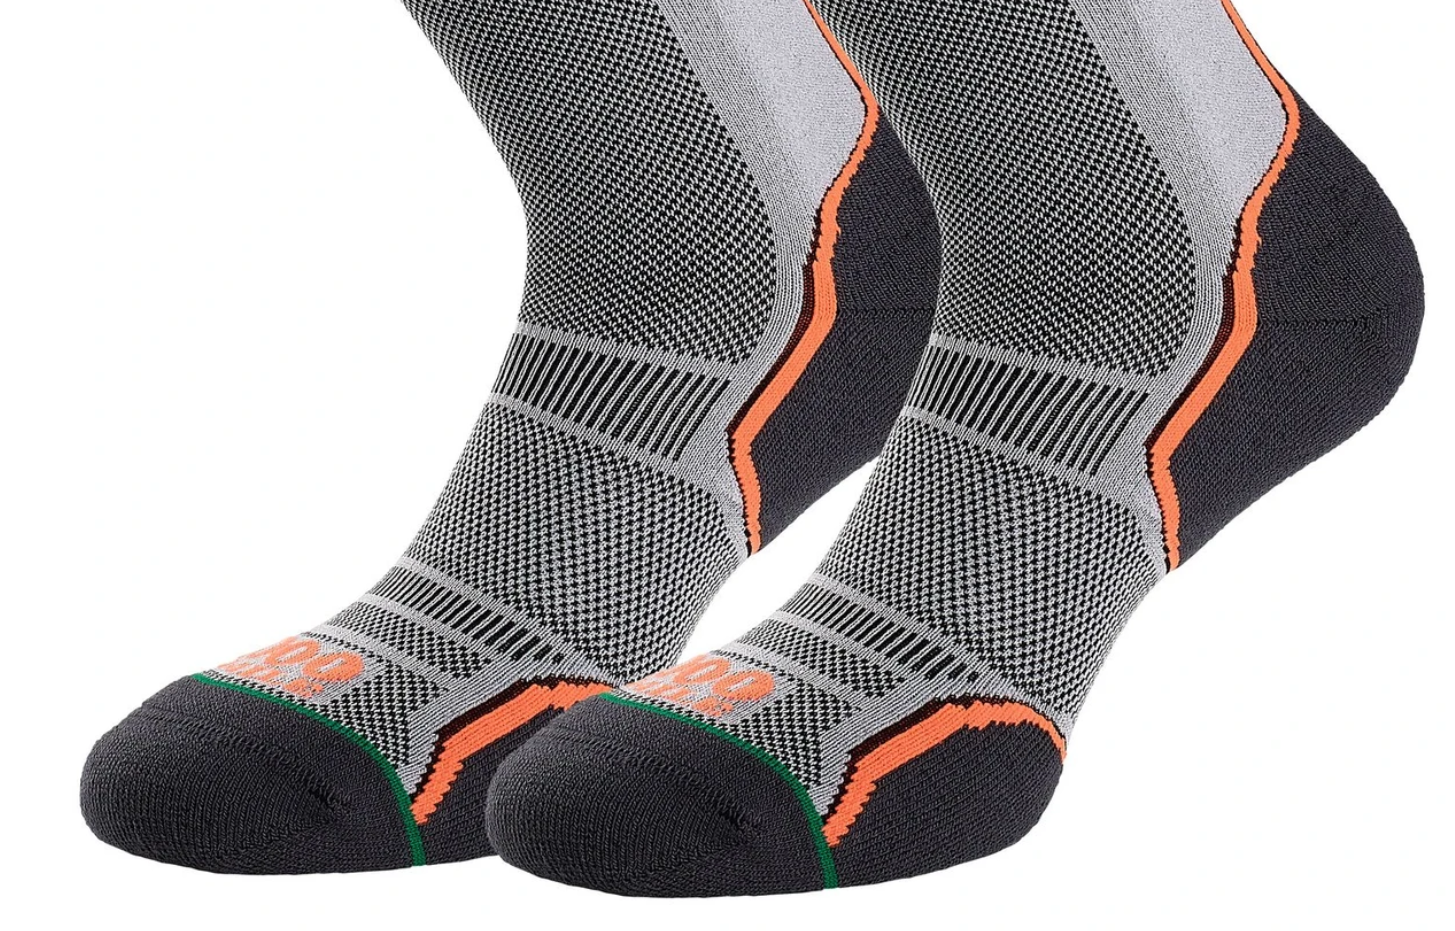 1,000 Miles Trail Sock Review